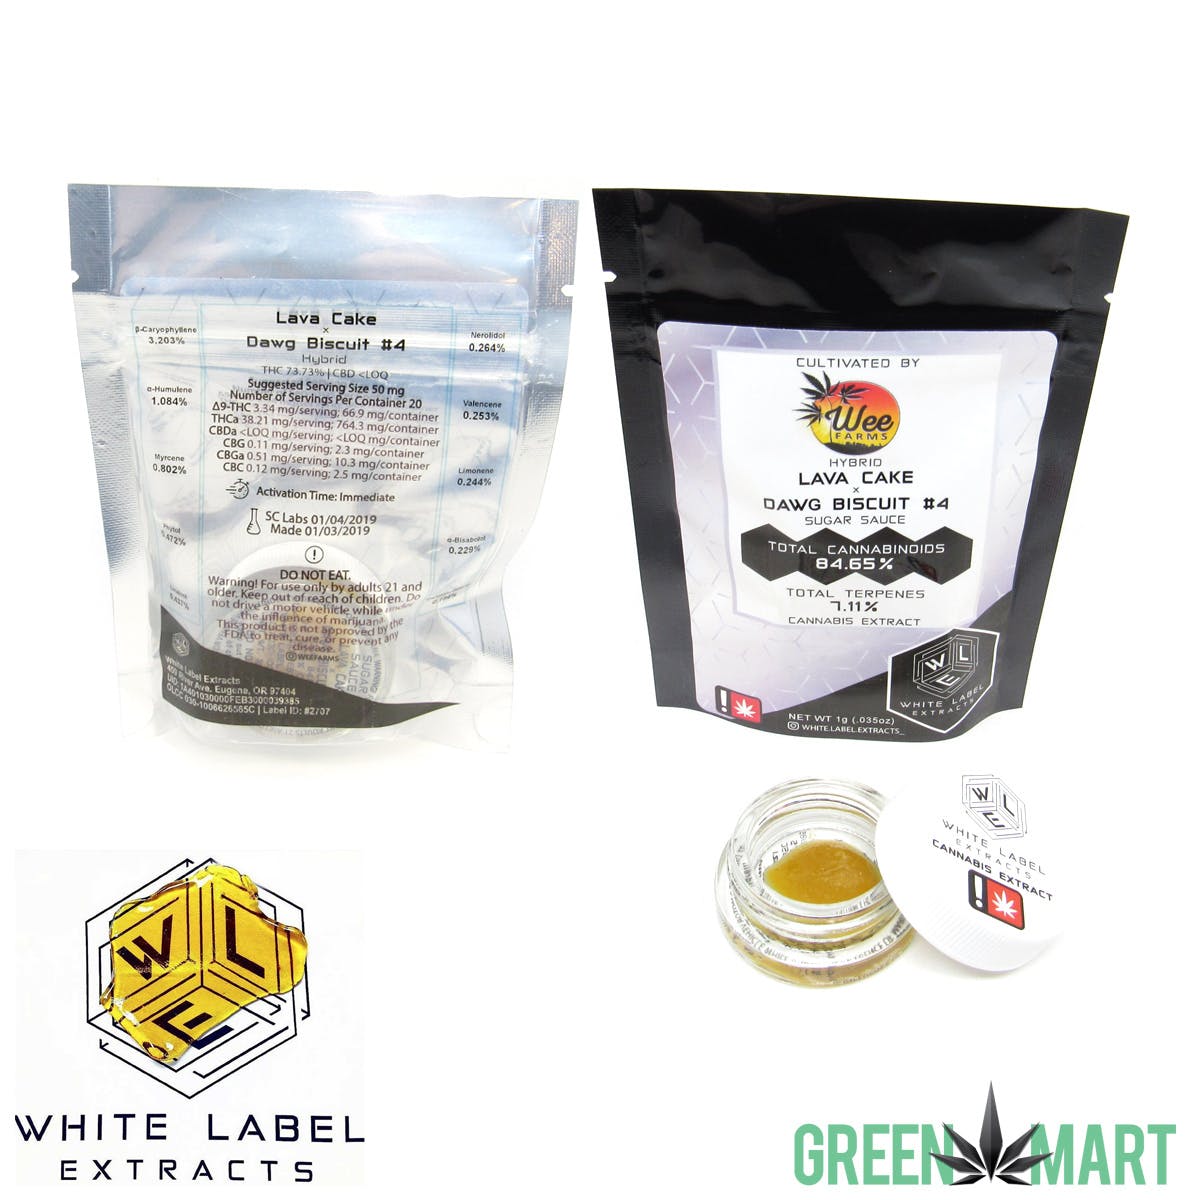 marijuana-dispensaries-12745-sw-walker-rd-ste-100a-beaverton-white-label-extracts-lava-cake-x-dawg-biscuit-234